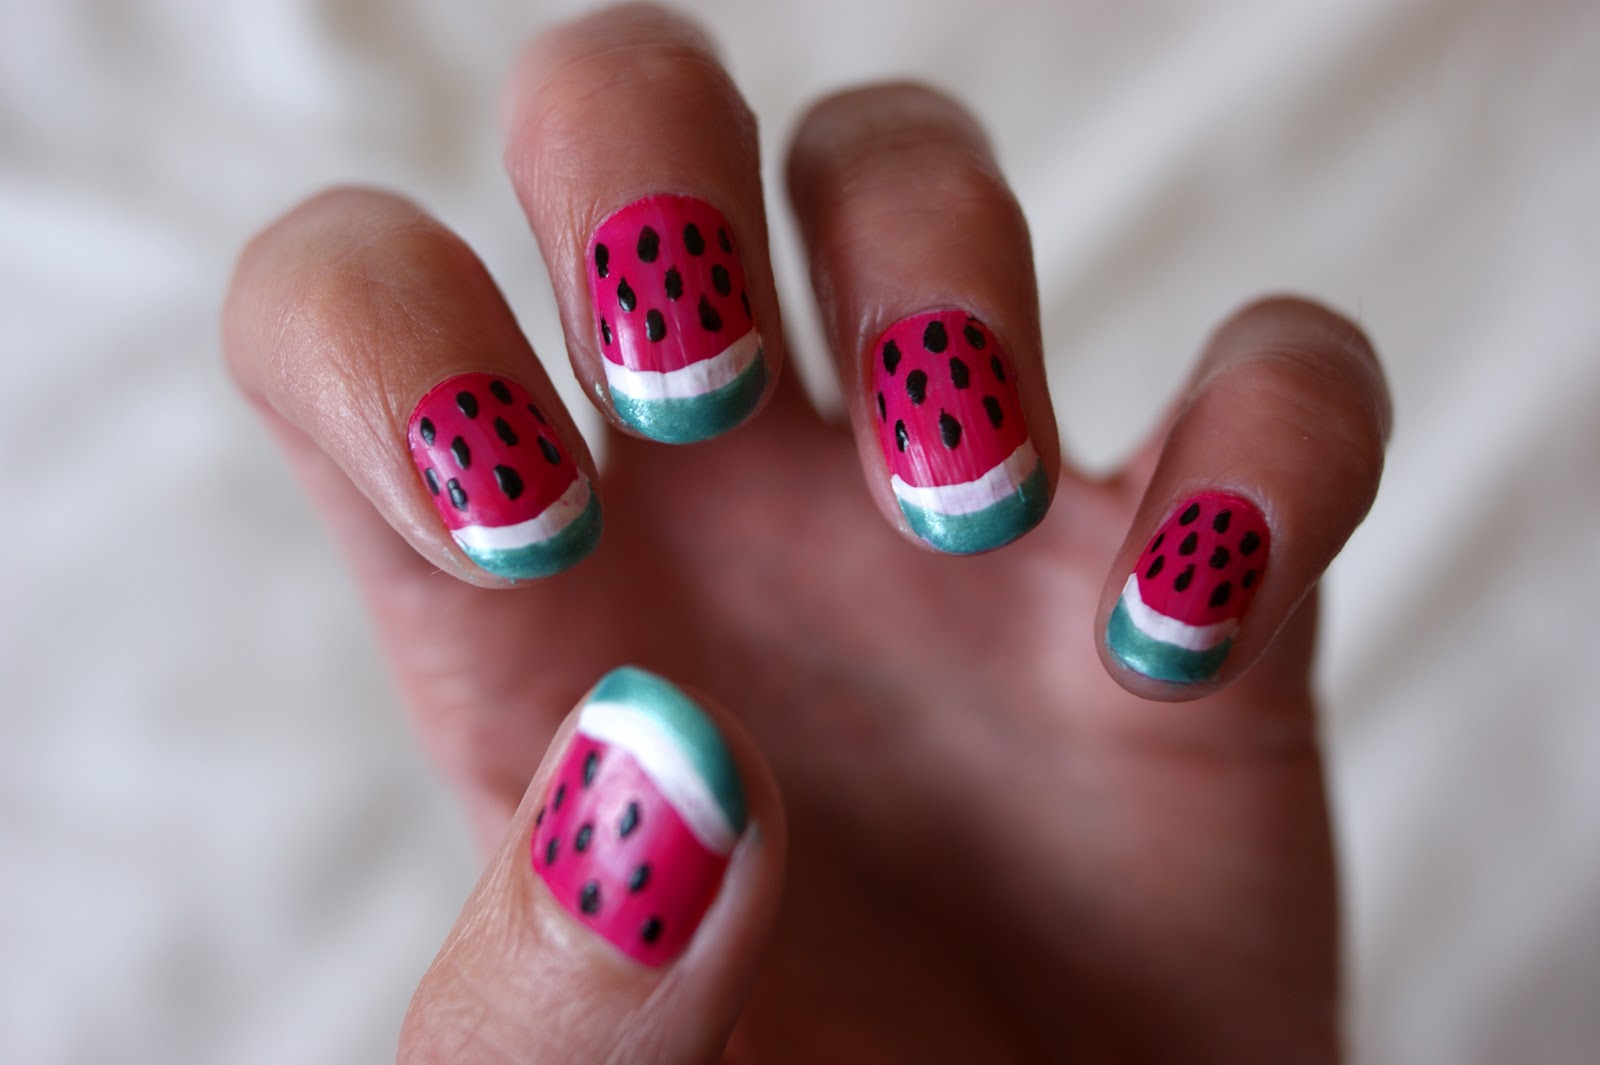 4. Sacramento's Best Nail Artists: Where to Get the Perfect Manicure - wide 1